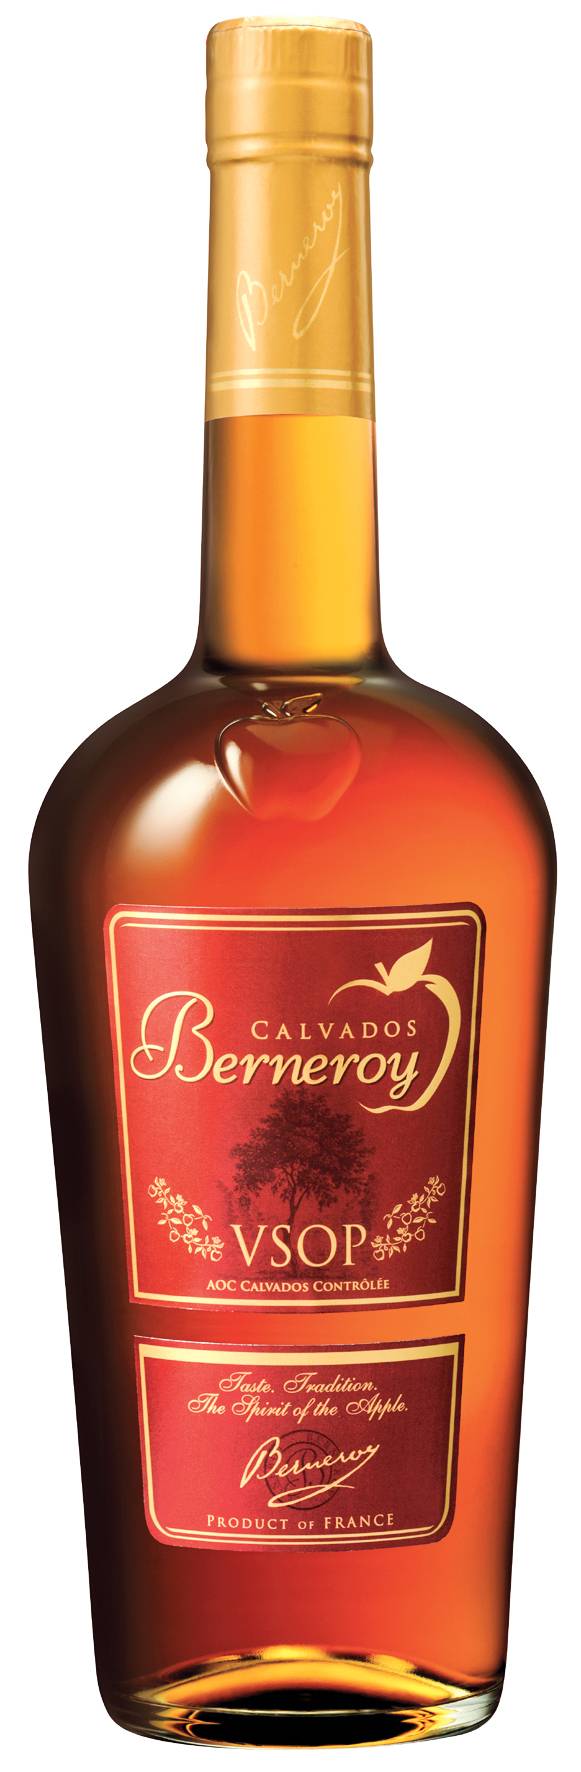 This French brandy is made from apples. 